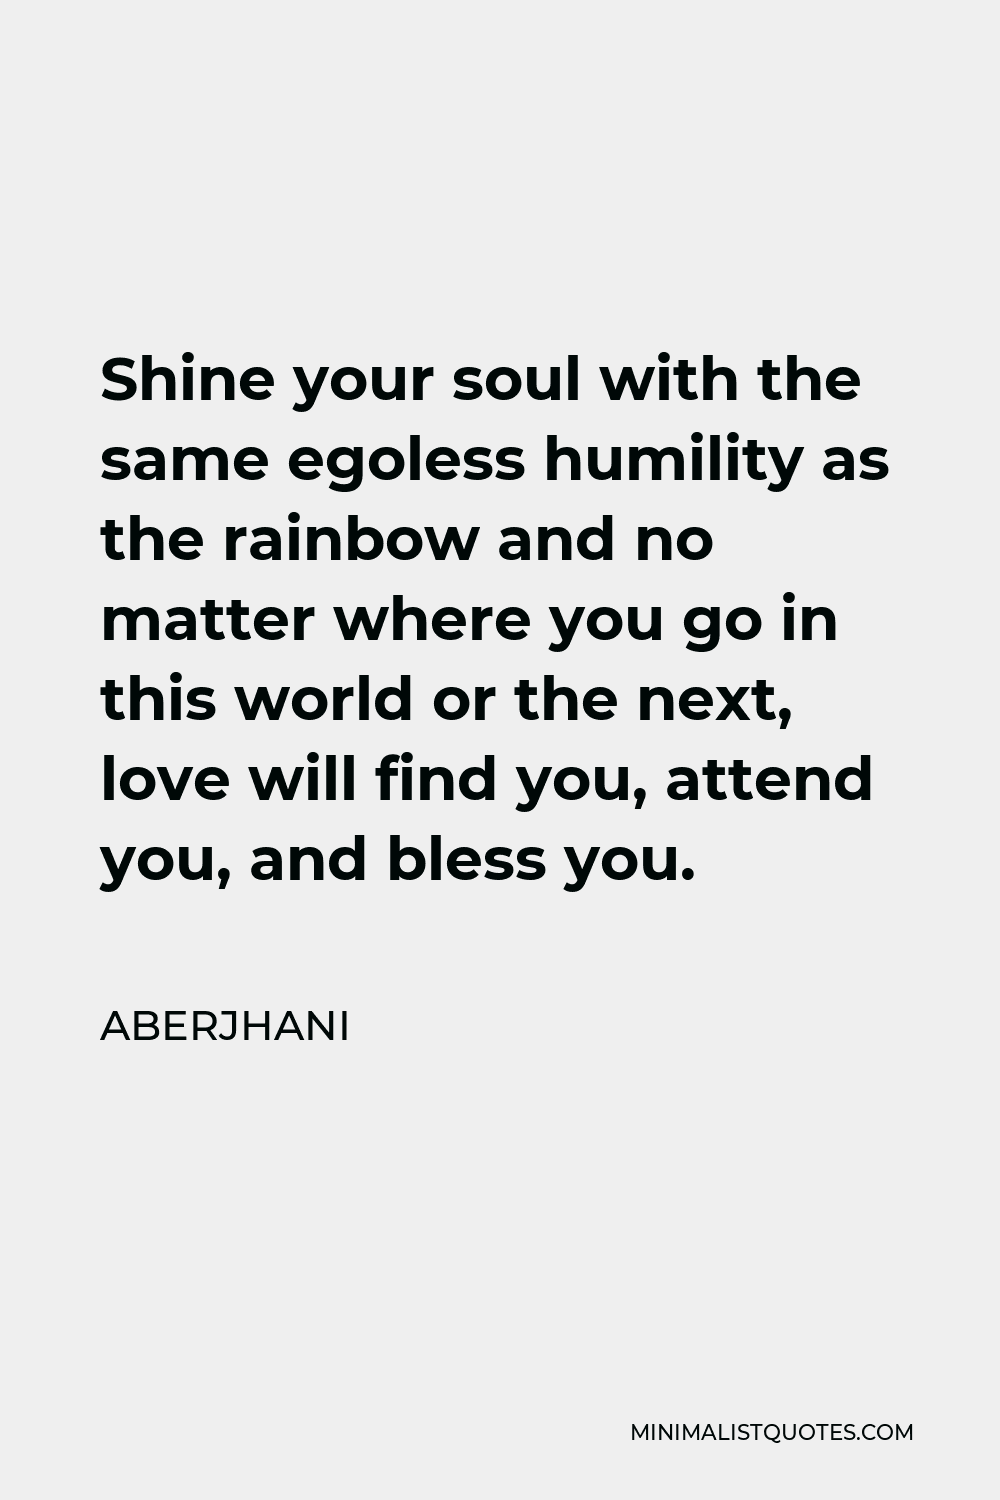 Aberjhani Quote - Shine your soul with the same egoless humility as the rainbow and no matter where you go in this world or the next, love will find you, attend you, and bless you.